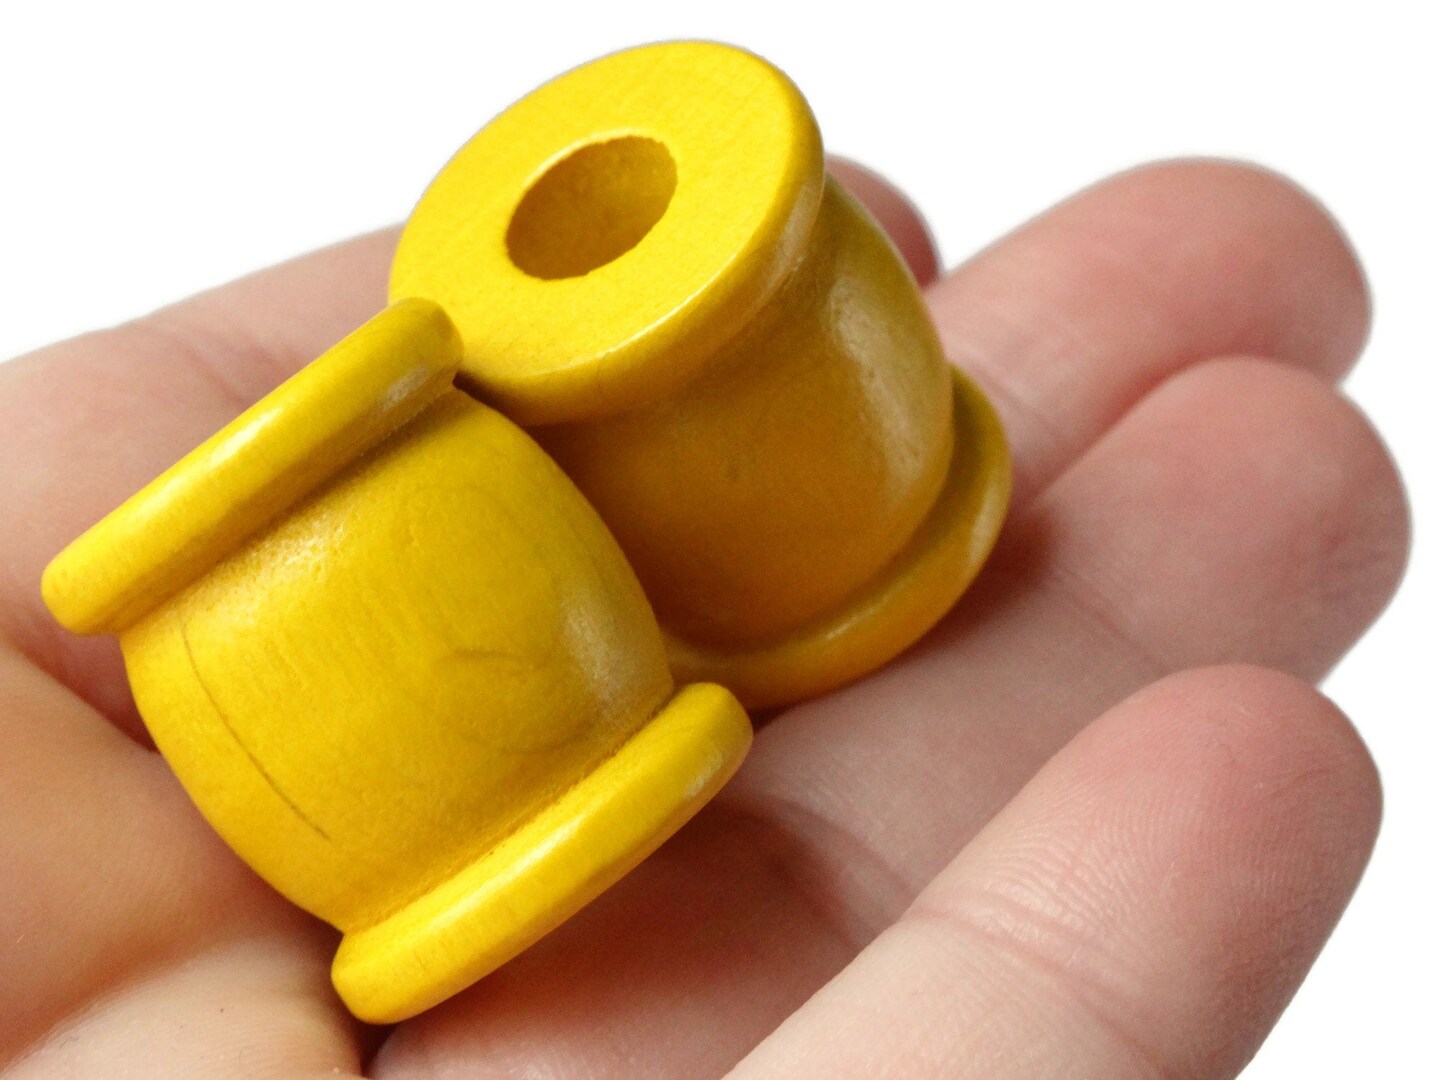 5 22mm Vintage Yellow Wooden Drum Beads Spool Beads